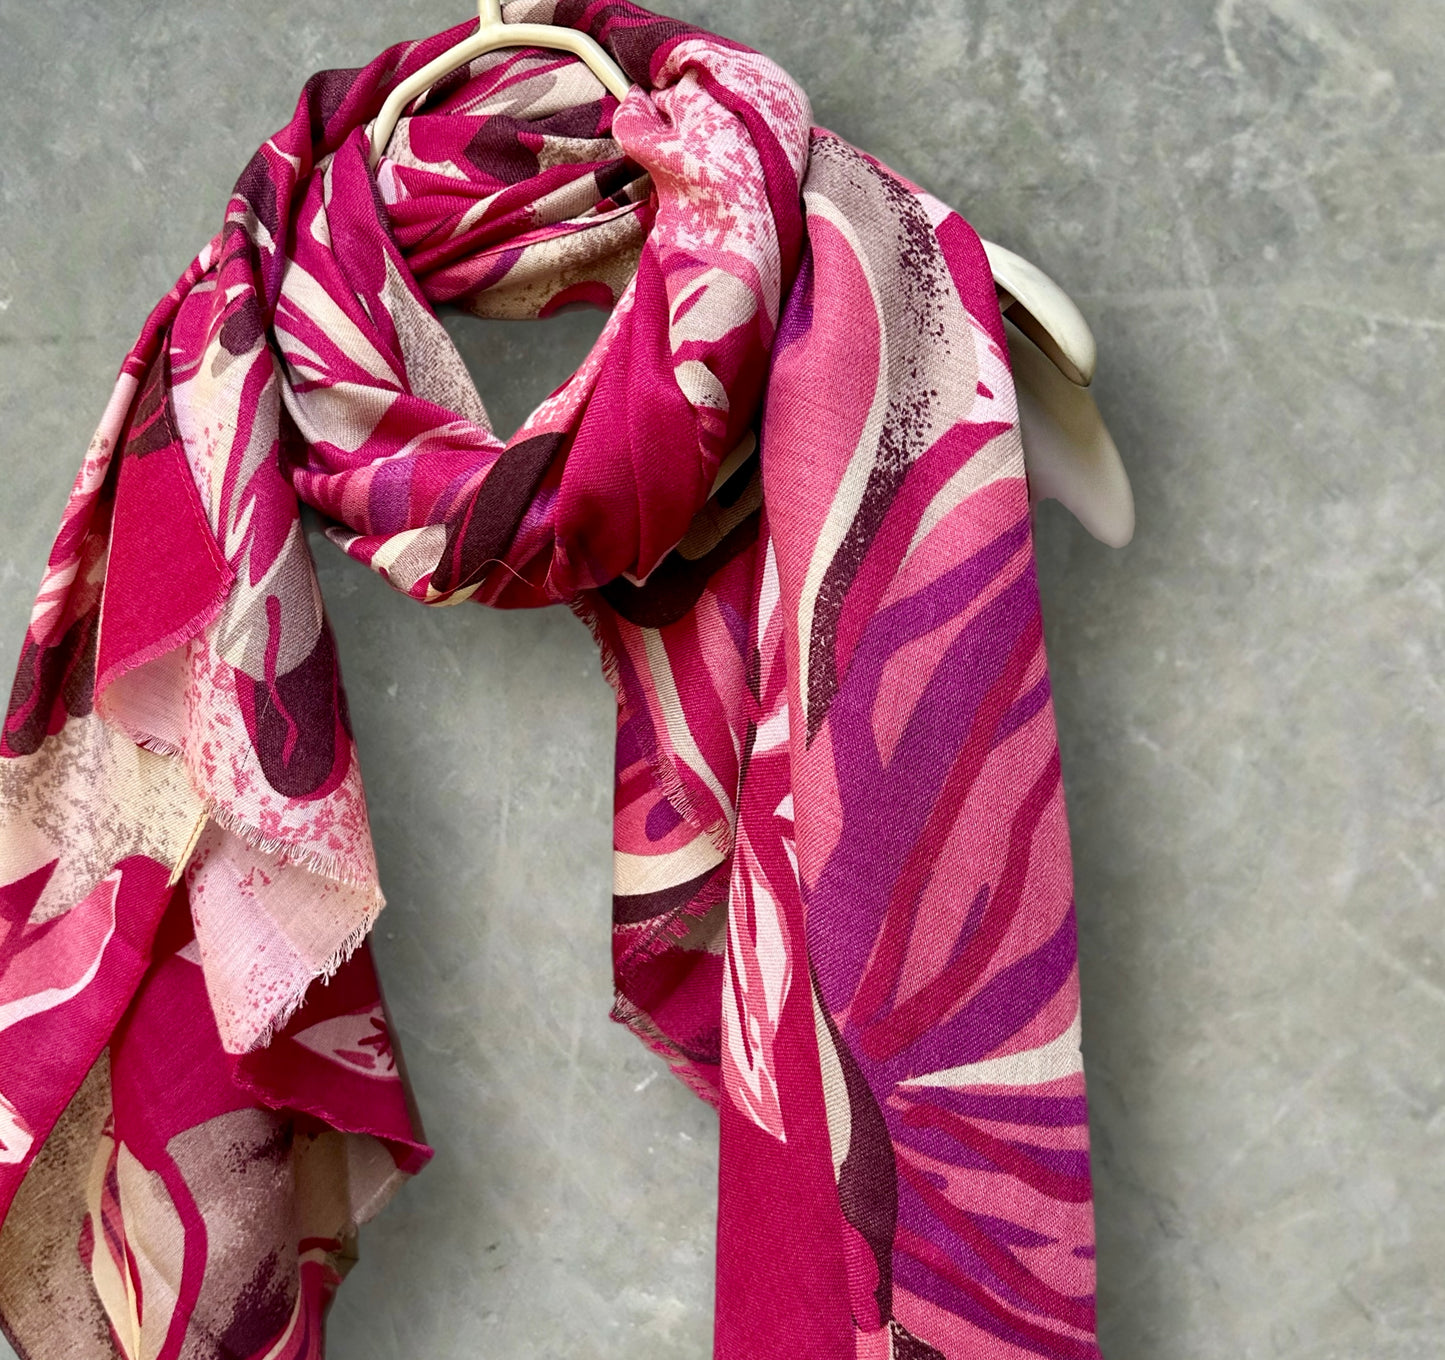 Vintage Inspired Pink Floral Scarf for Women,Perfect All-Year Accessory,Ideal Grey Gifts for Mother's Day,Birthday, and Christmas.